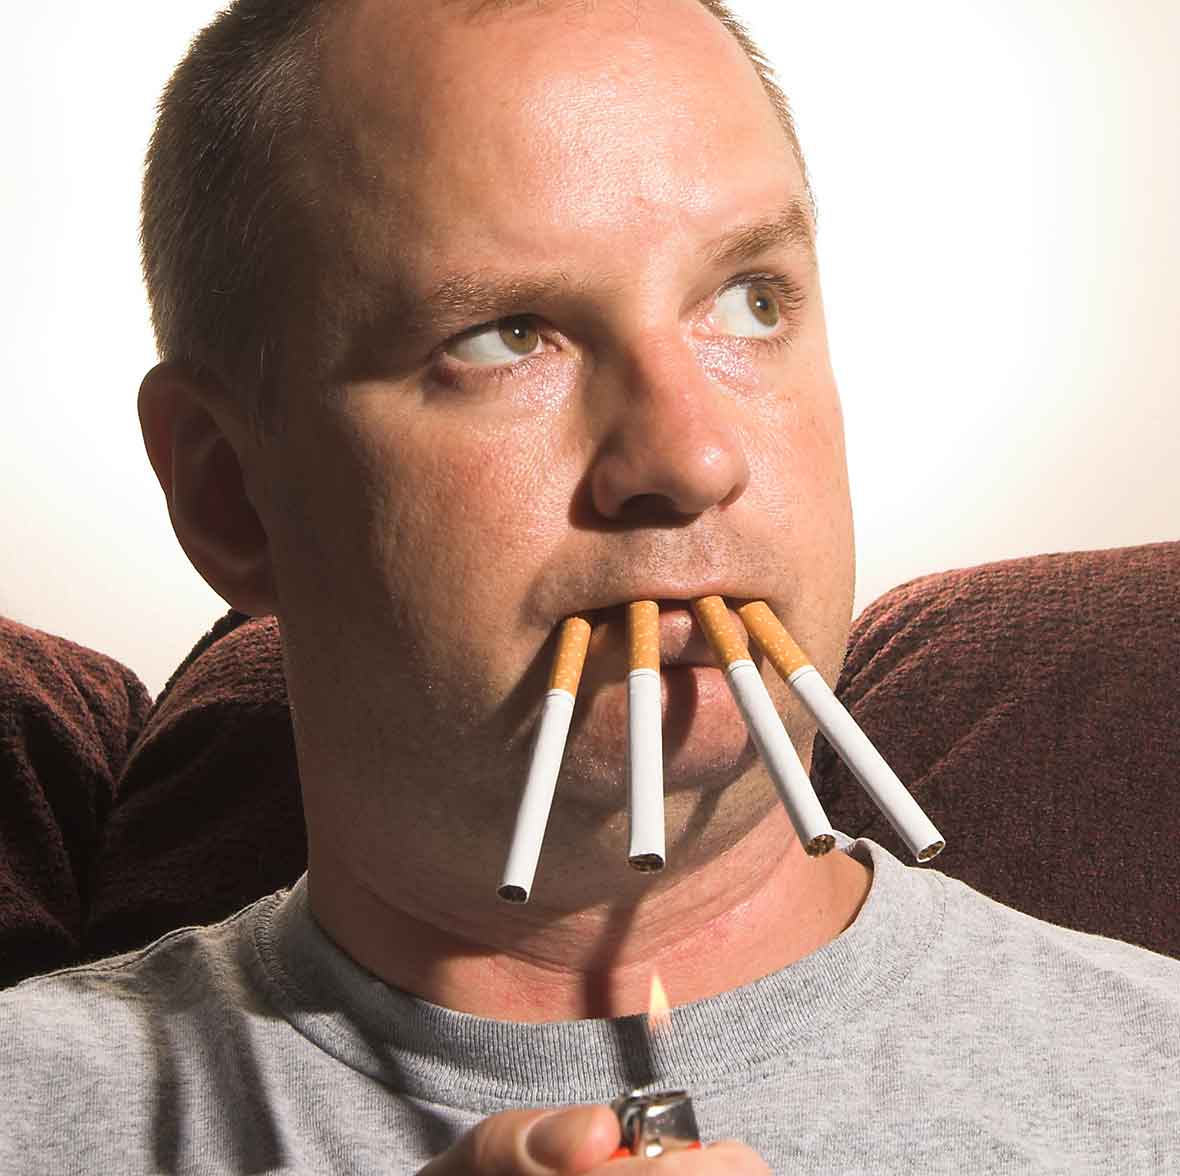 does smoking cause hair loss in men